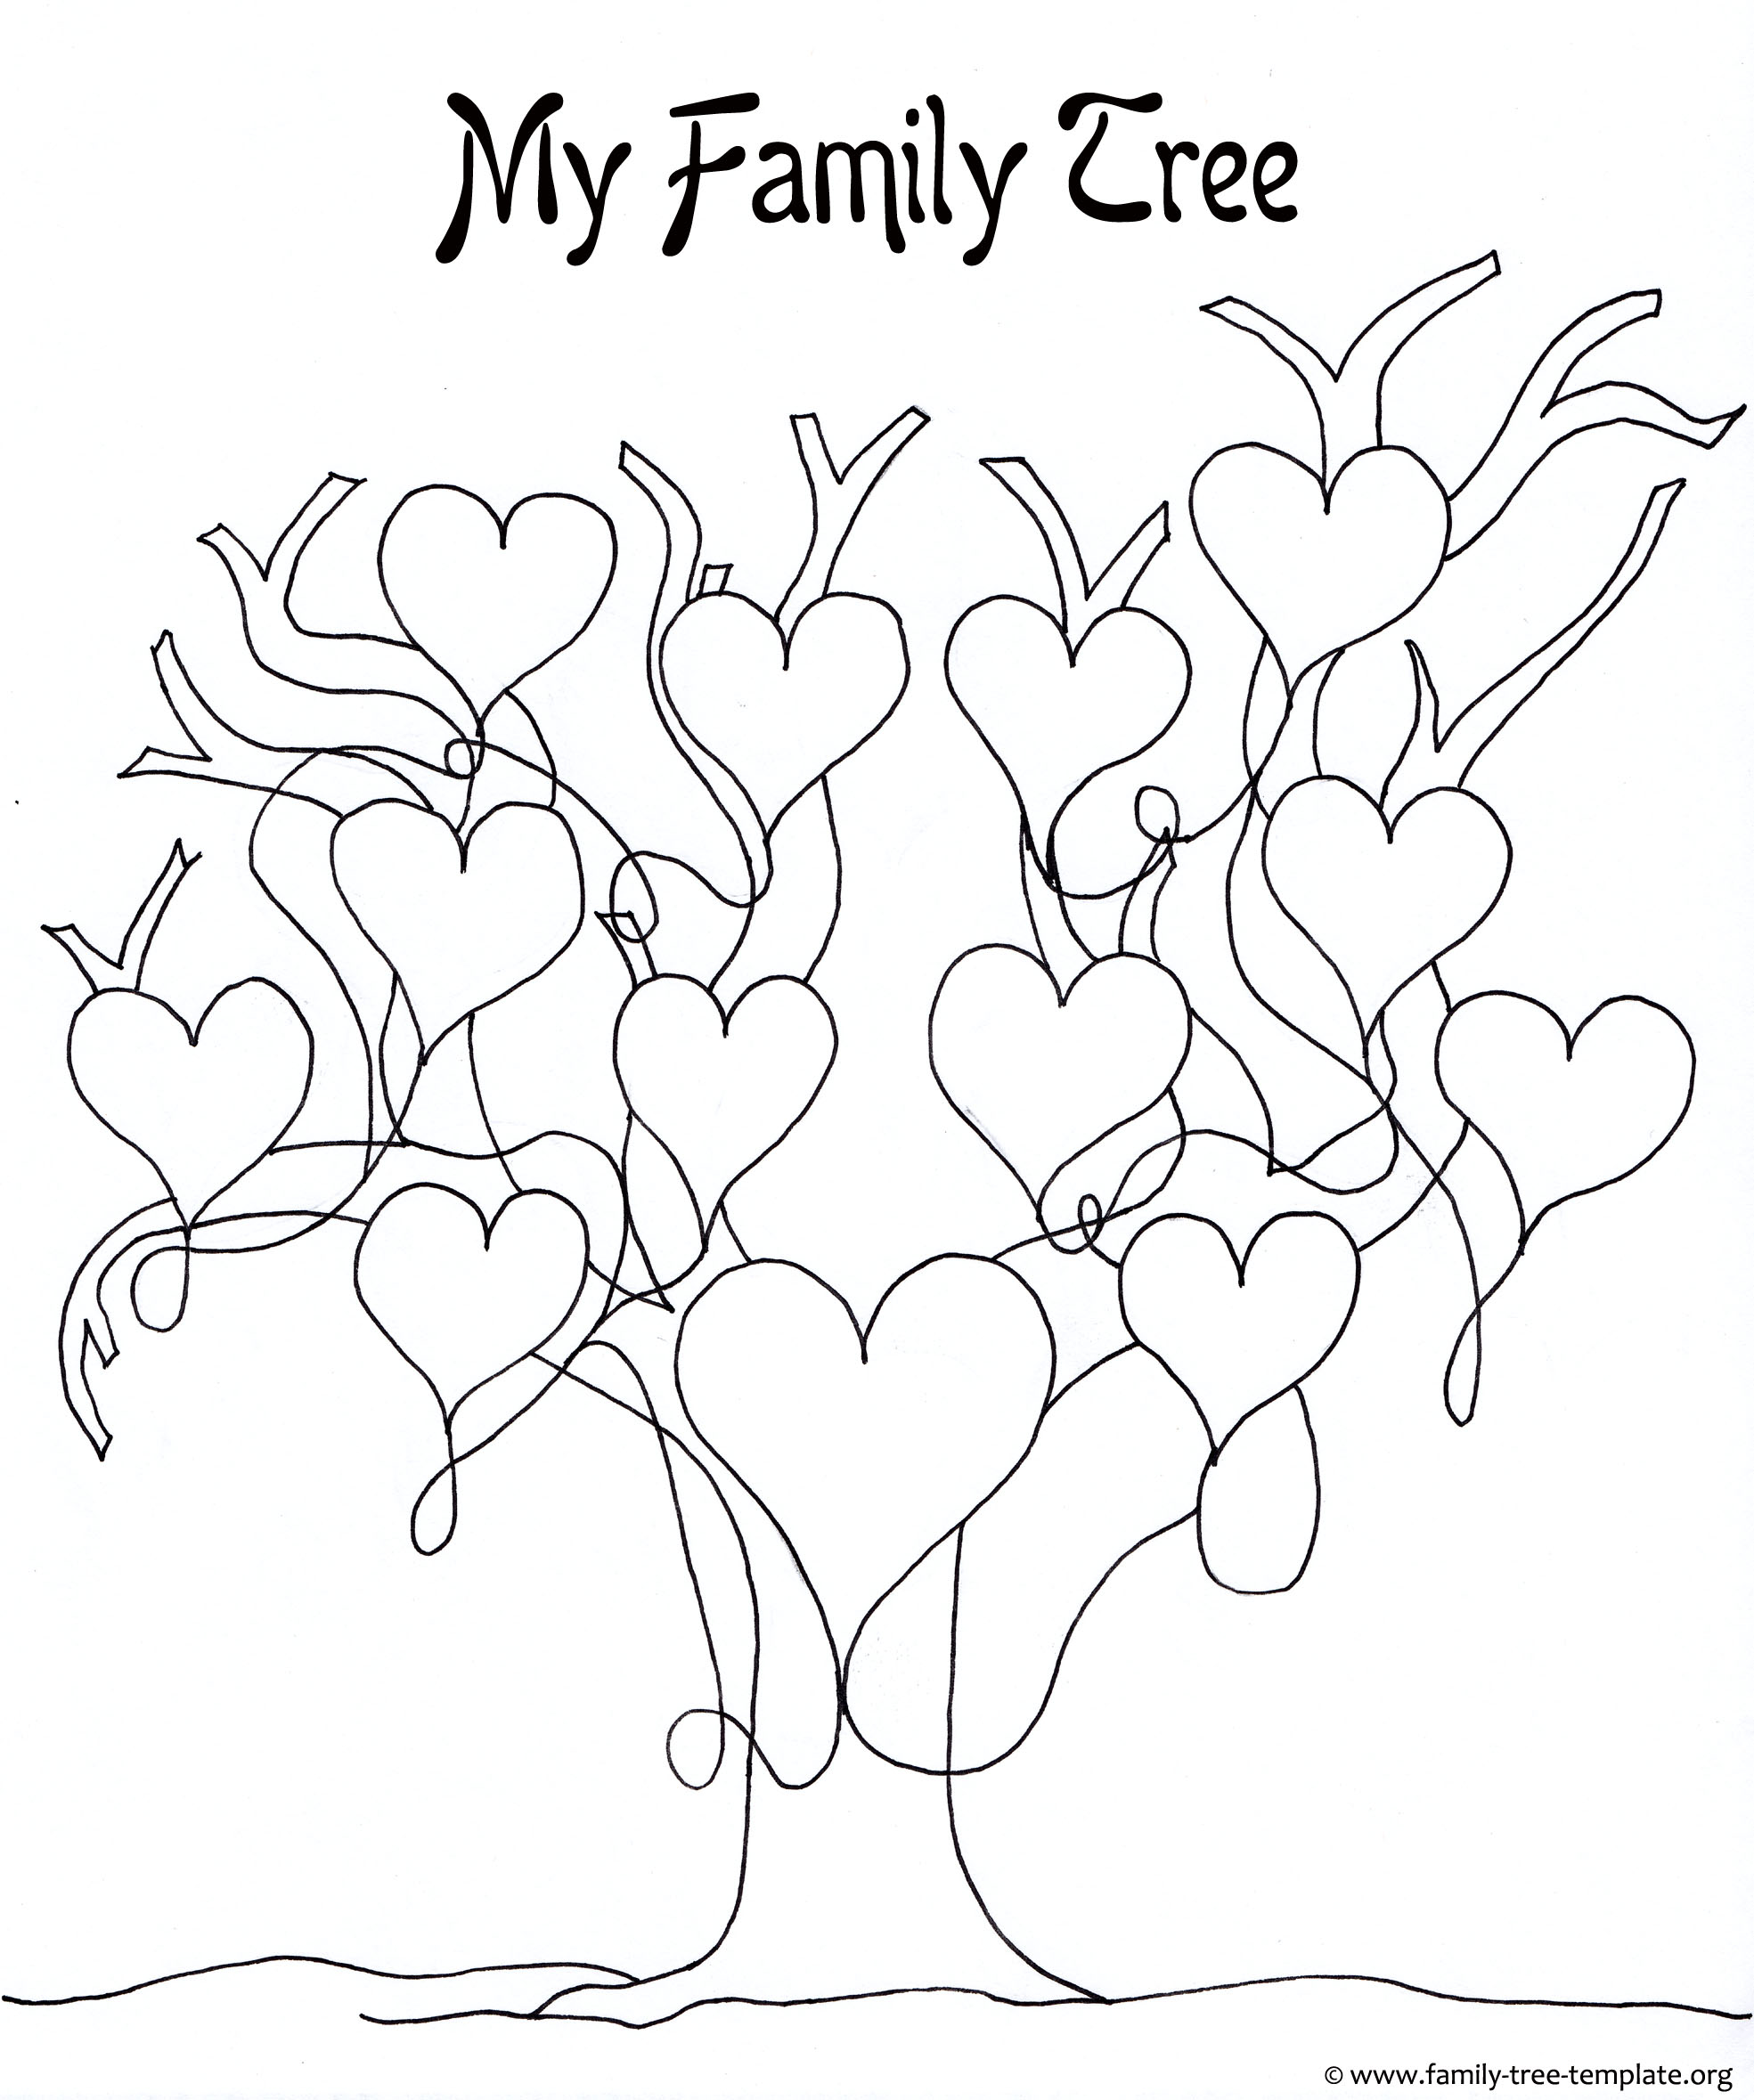 Printable family tree for girls to color and have fun with.